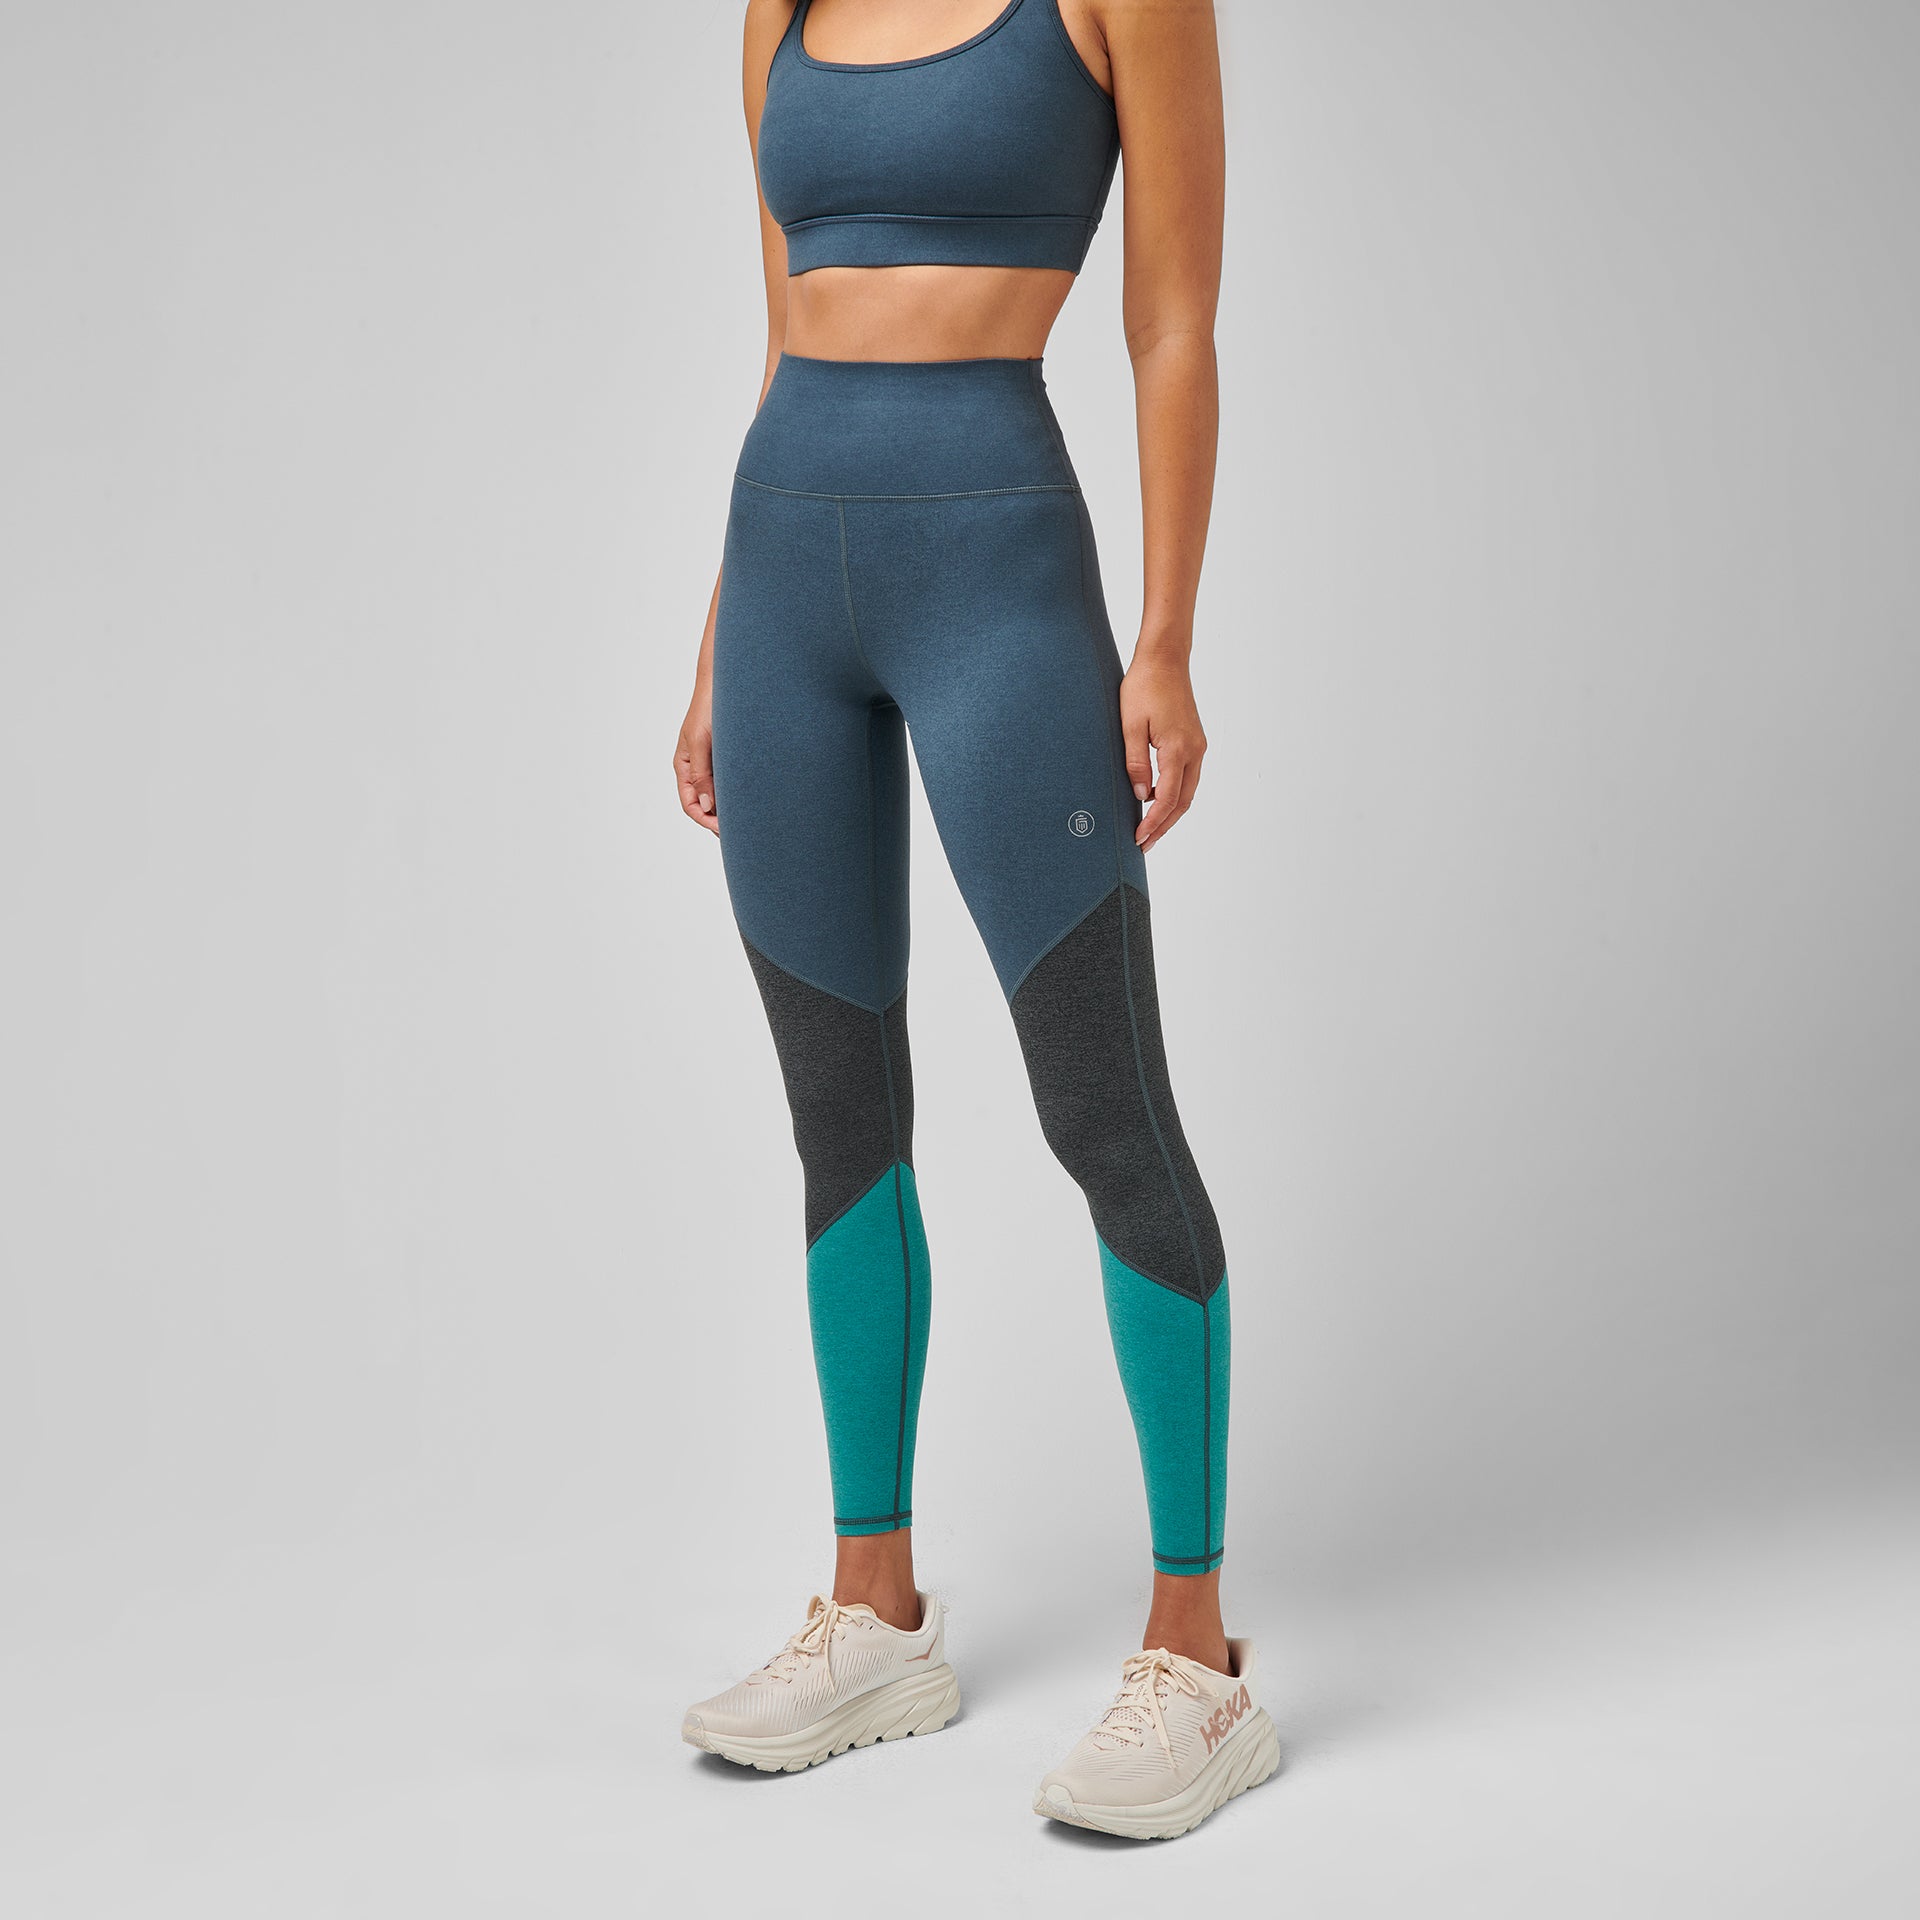 REVIEWED: Proskin Running Leggings get the thumbs up from Healthista  fitness blogger Kelly Du Buisson - Healthista